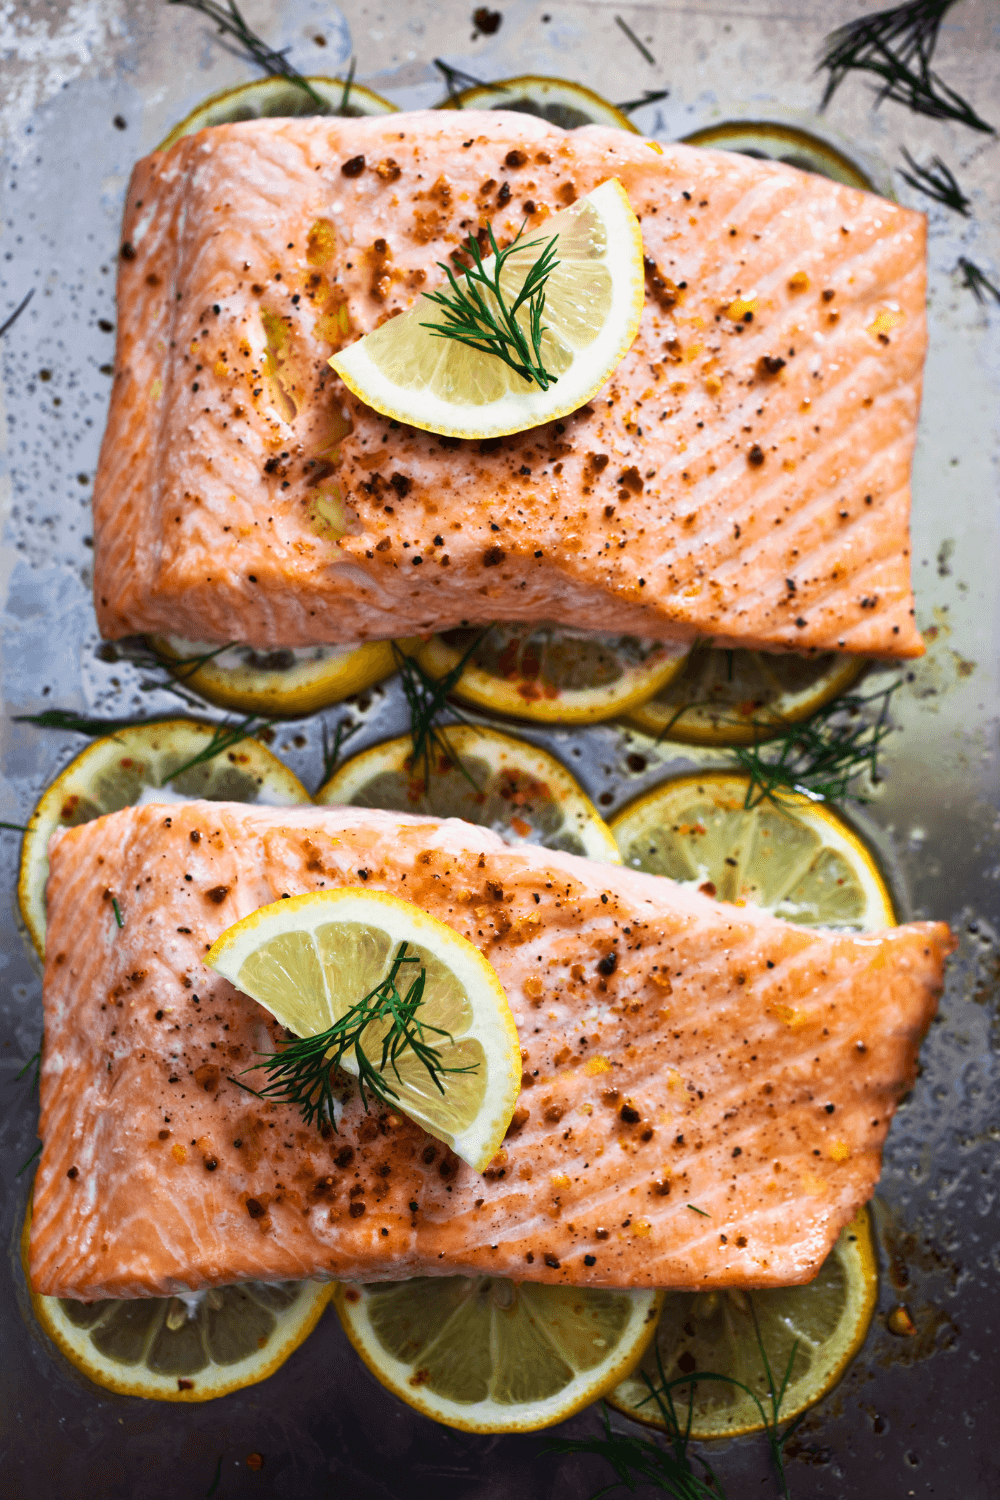 How Long To Bake Salmon At 375